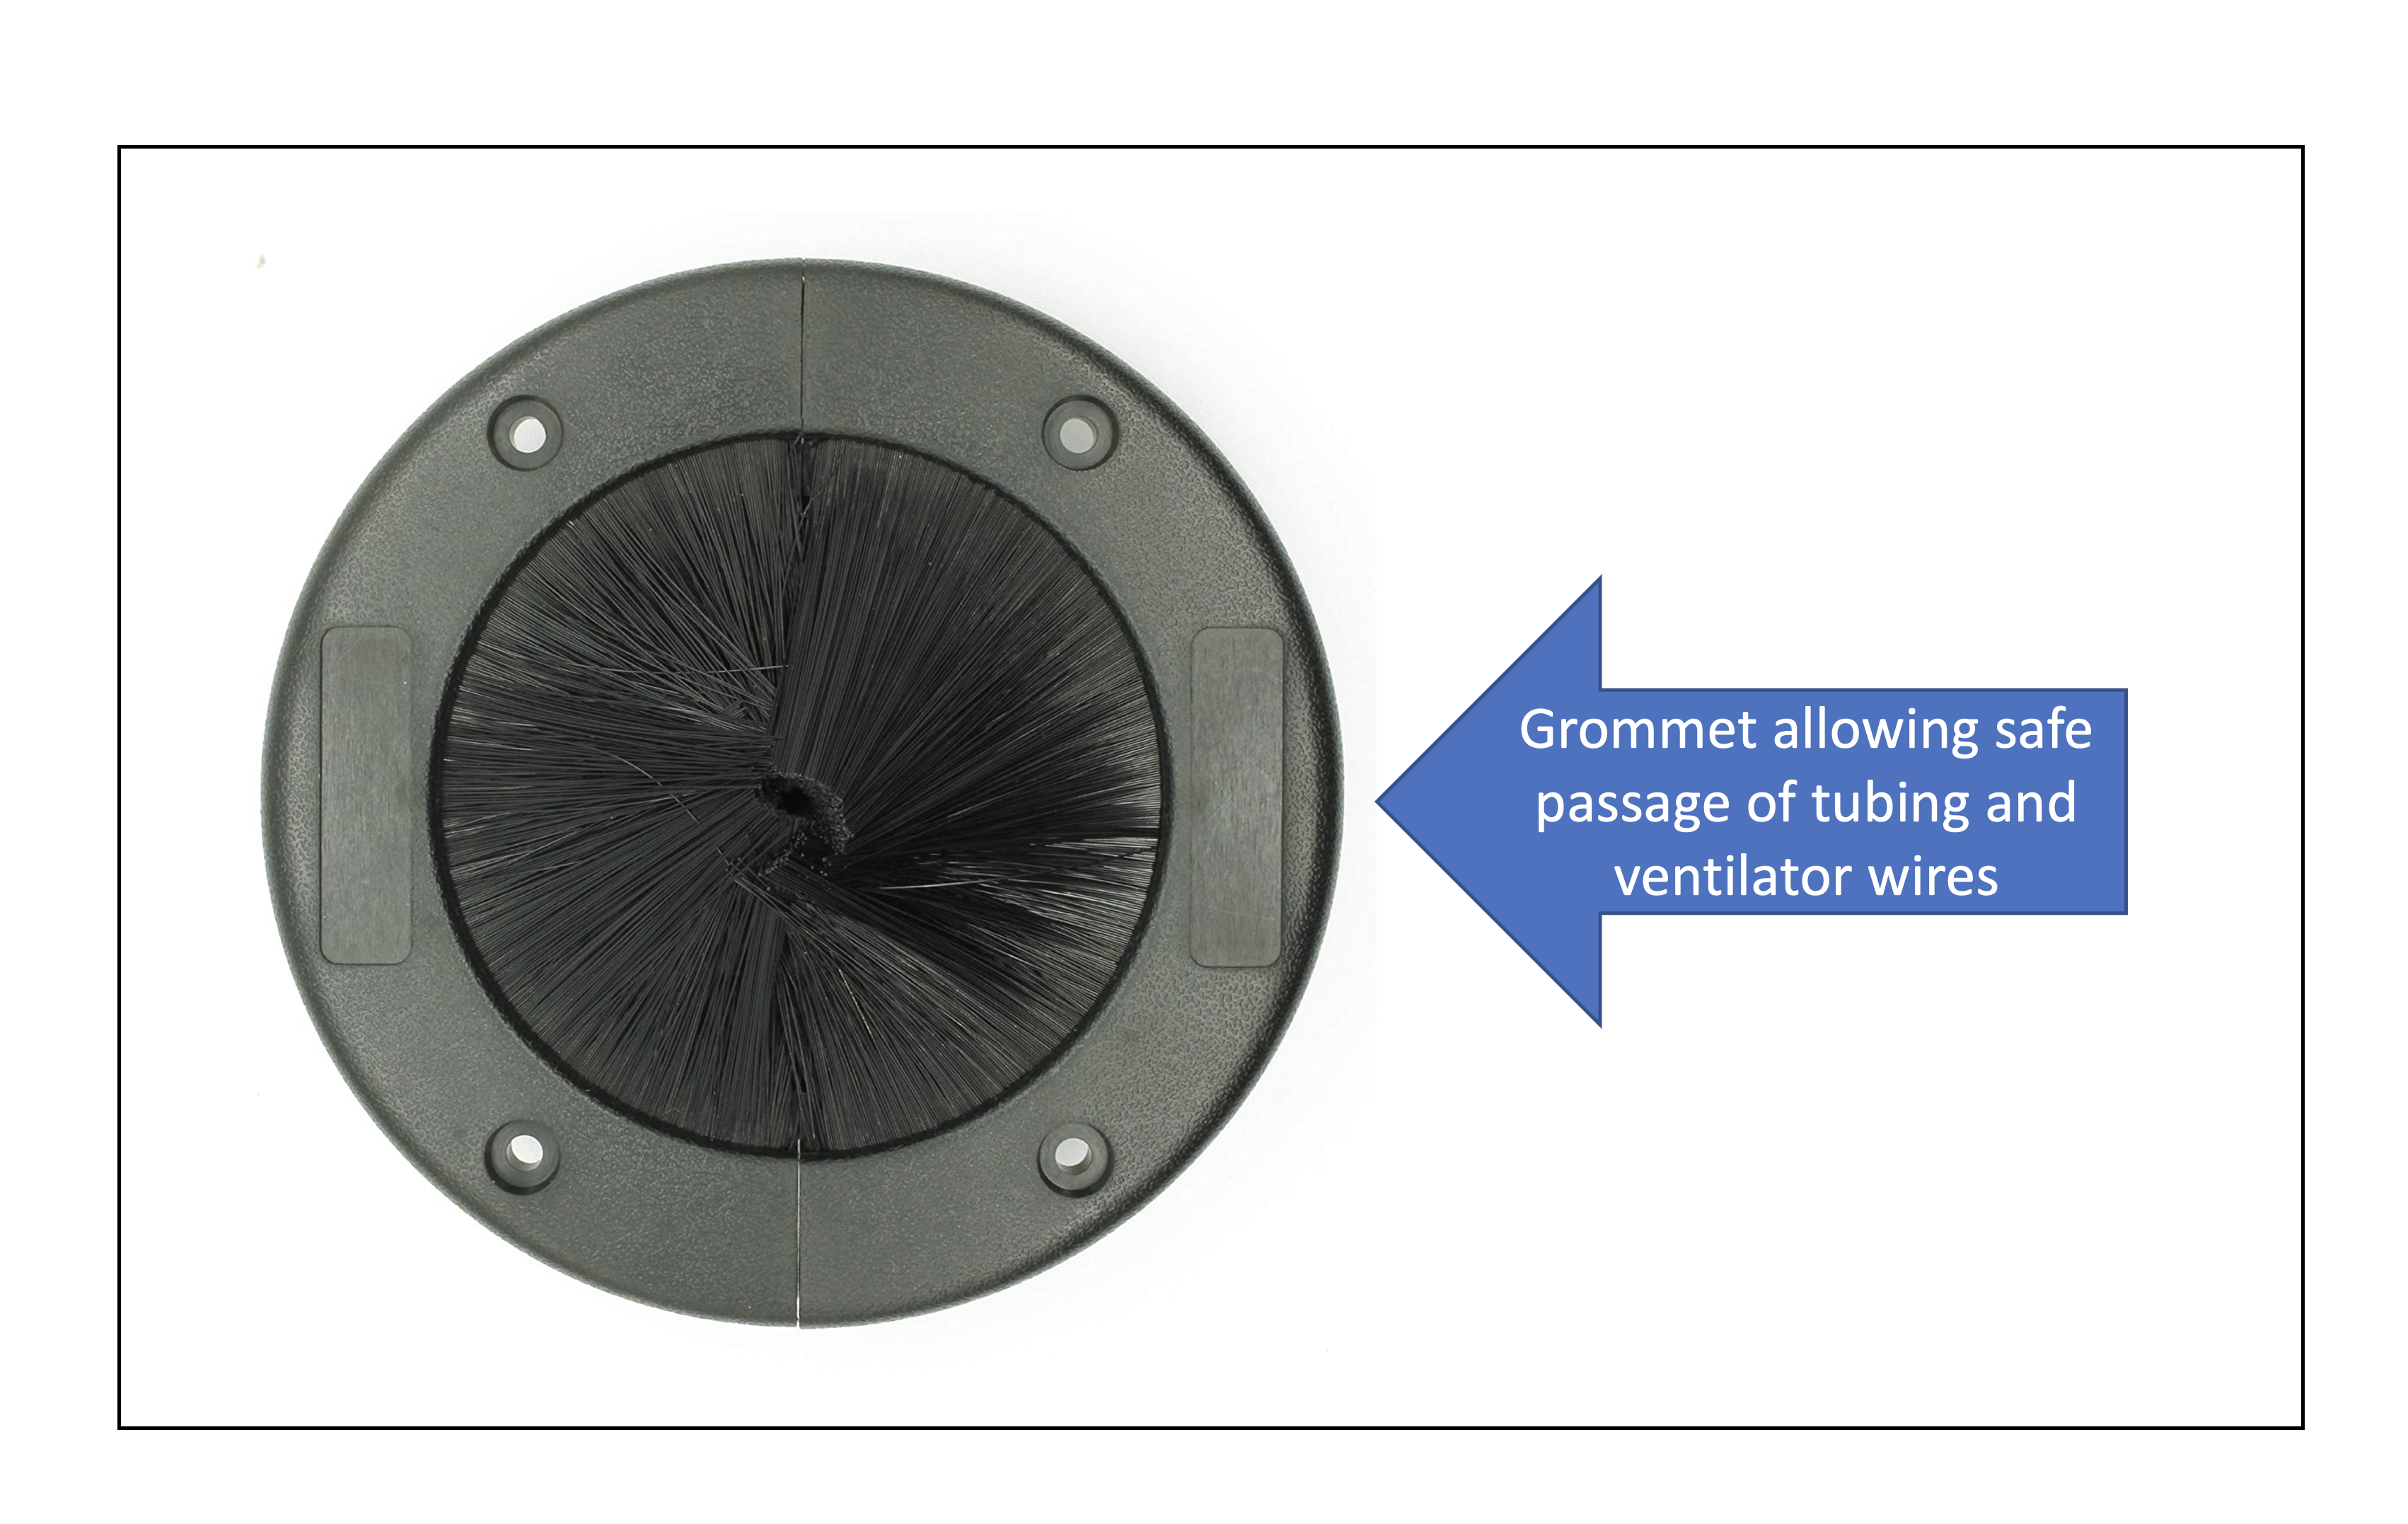 Figure 5: Depicting a grommet that allows safe passage of tubing and wires across ICU room doors.